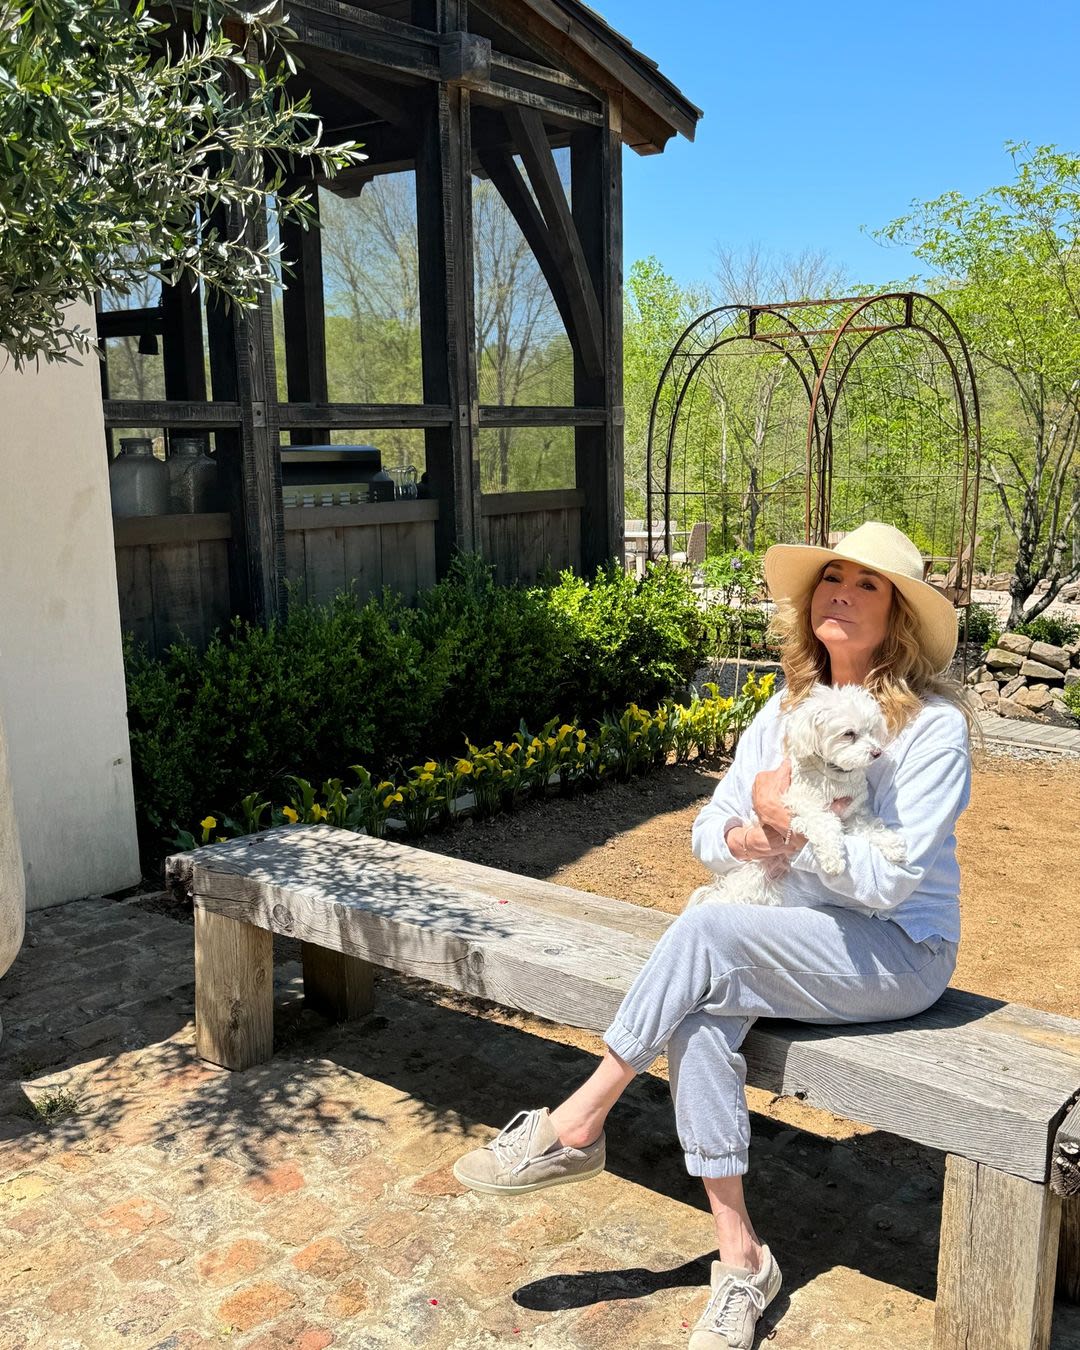 Kathie Lee Gifford Goes Comfy and Casual in Latest Photos Snapped in Stunning Garden